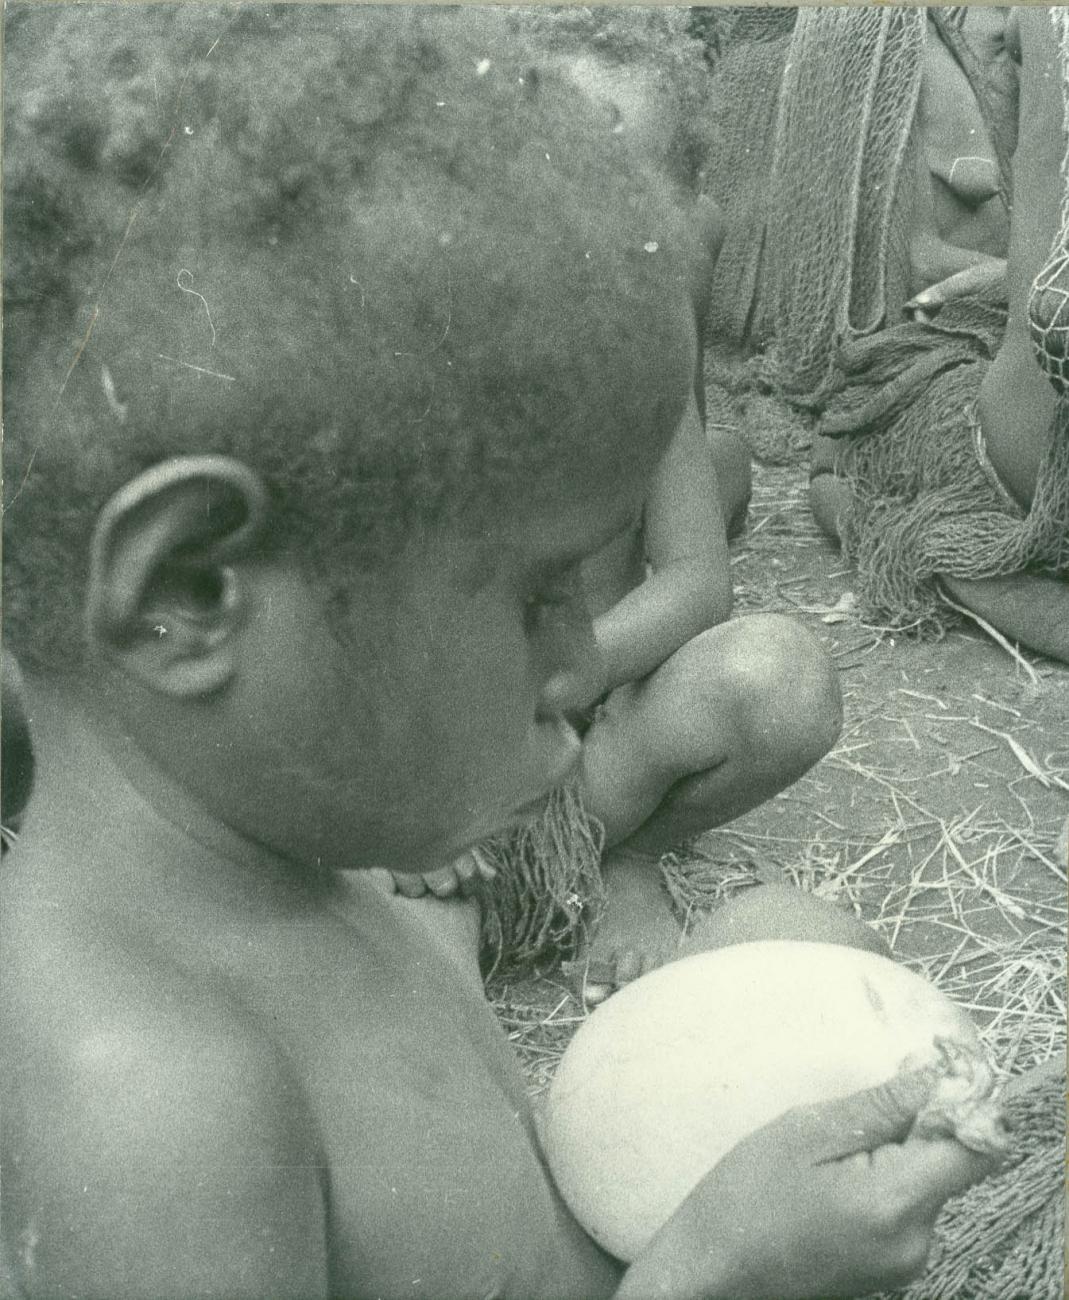 BD/40/74 - 
Child with cassowary egg
